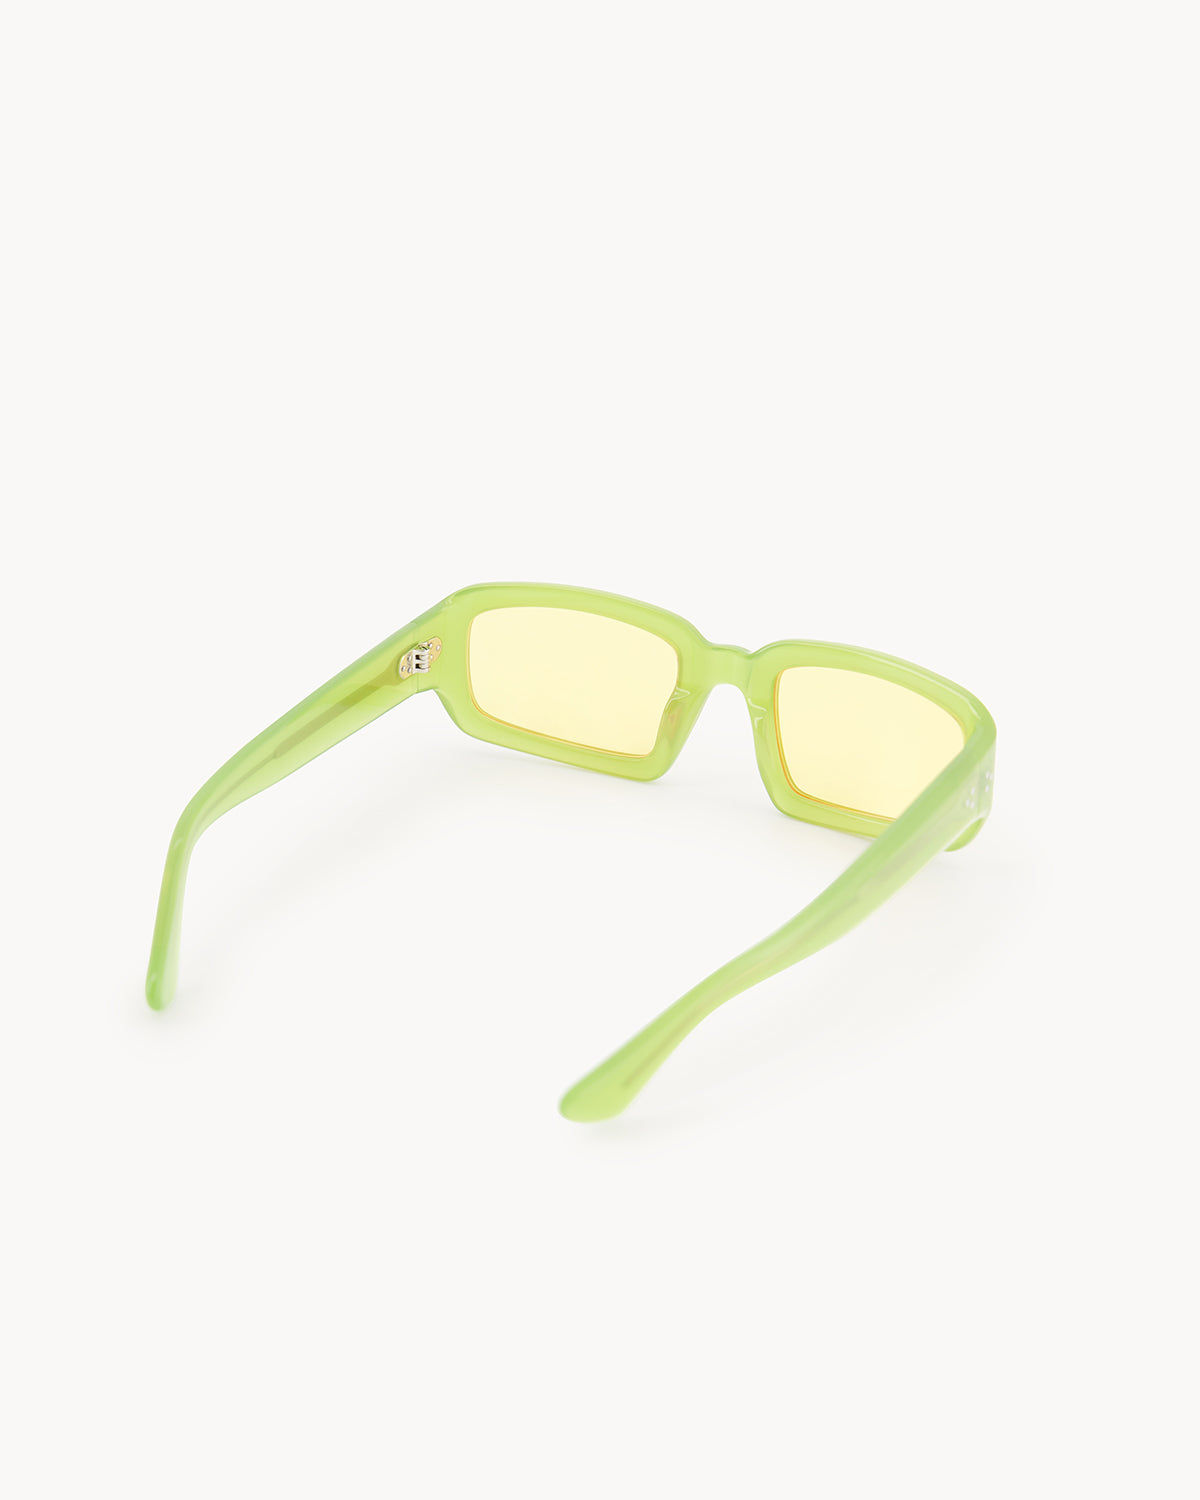 Port Tanger Mektoub Sunglasses in Lime Acetate and Warm Olive Lenses 3